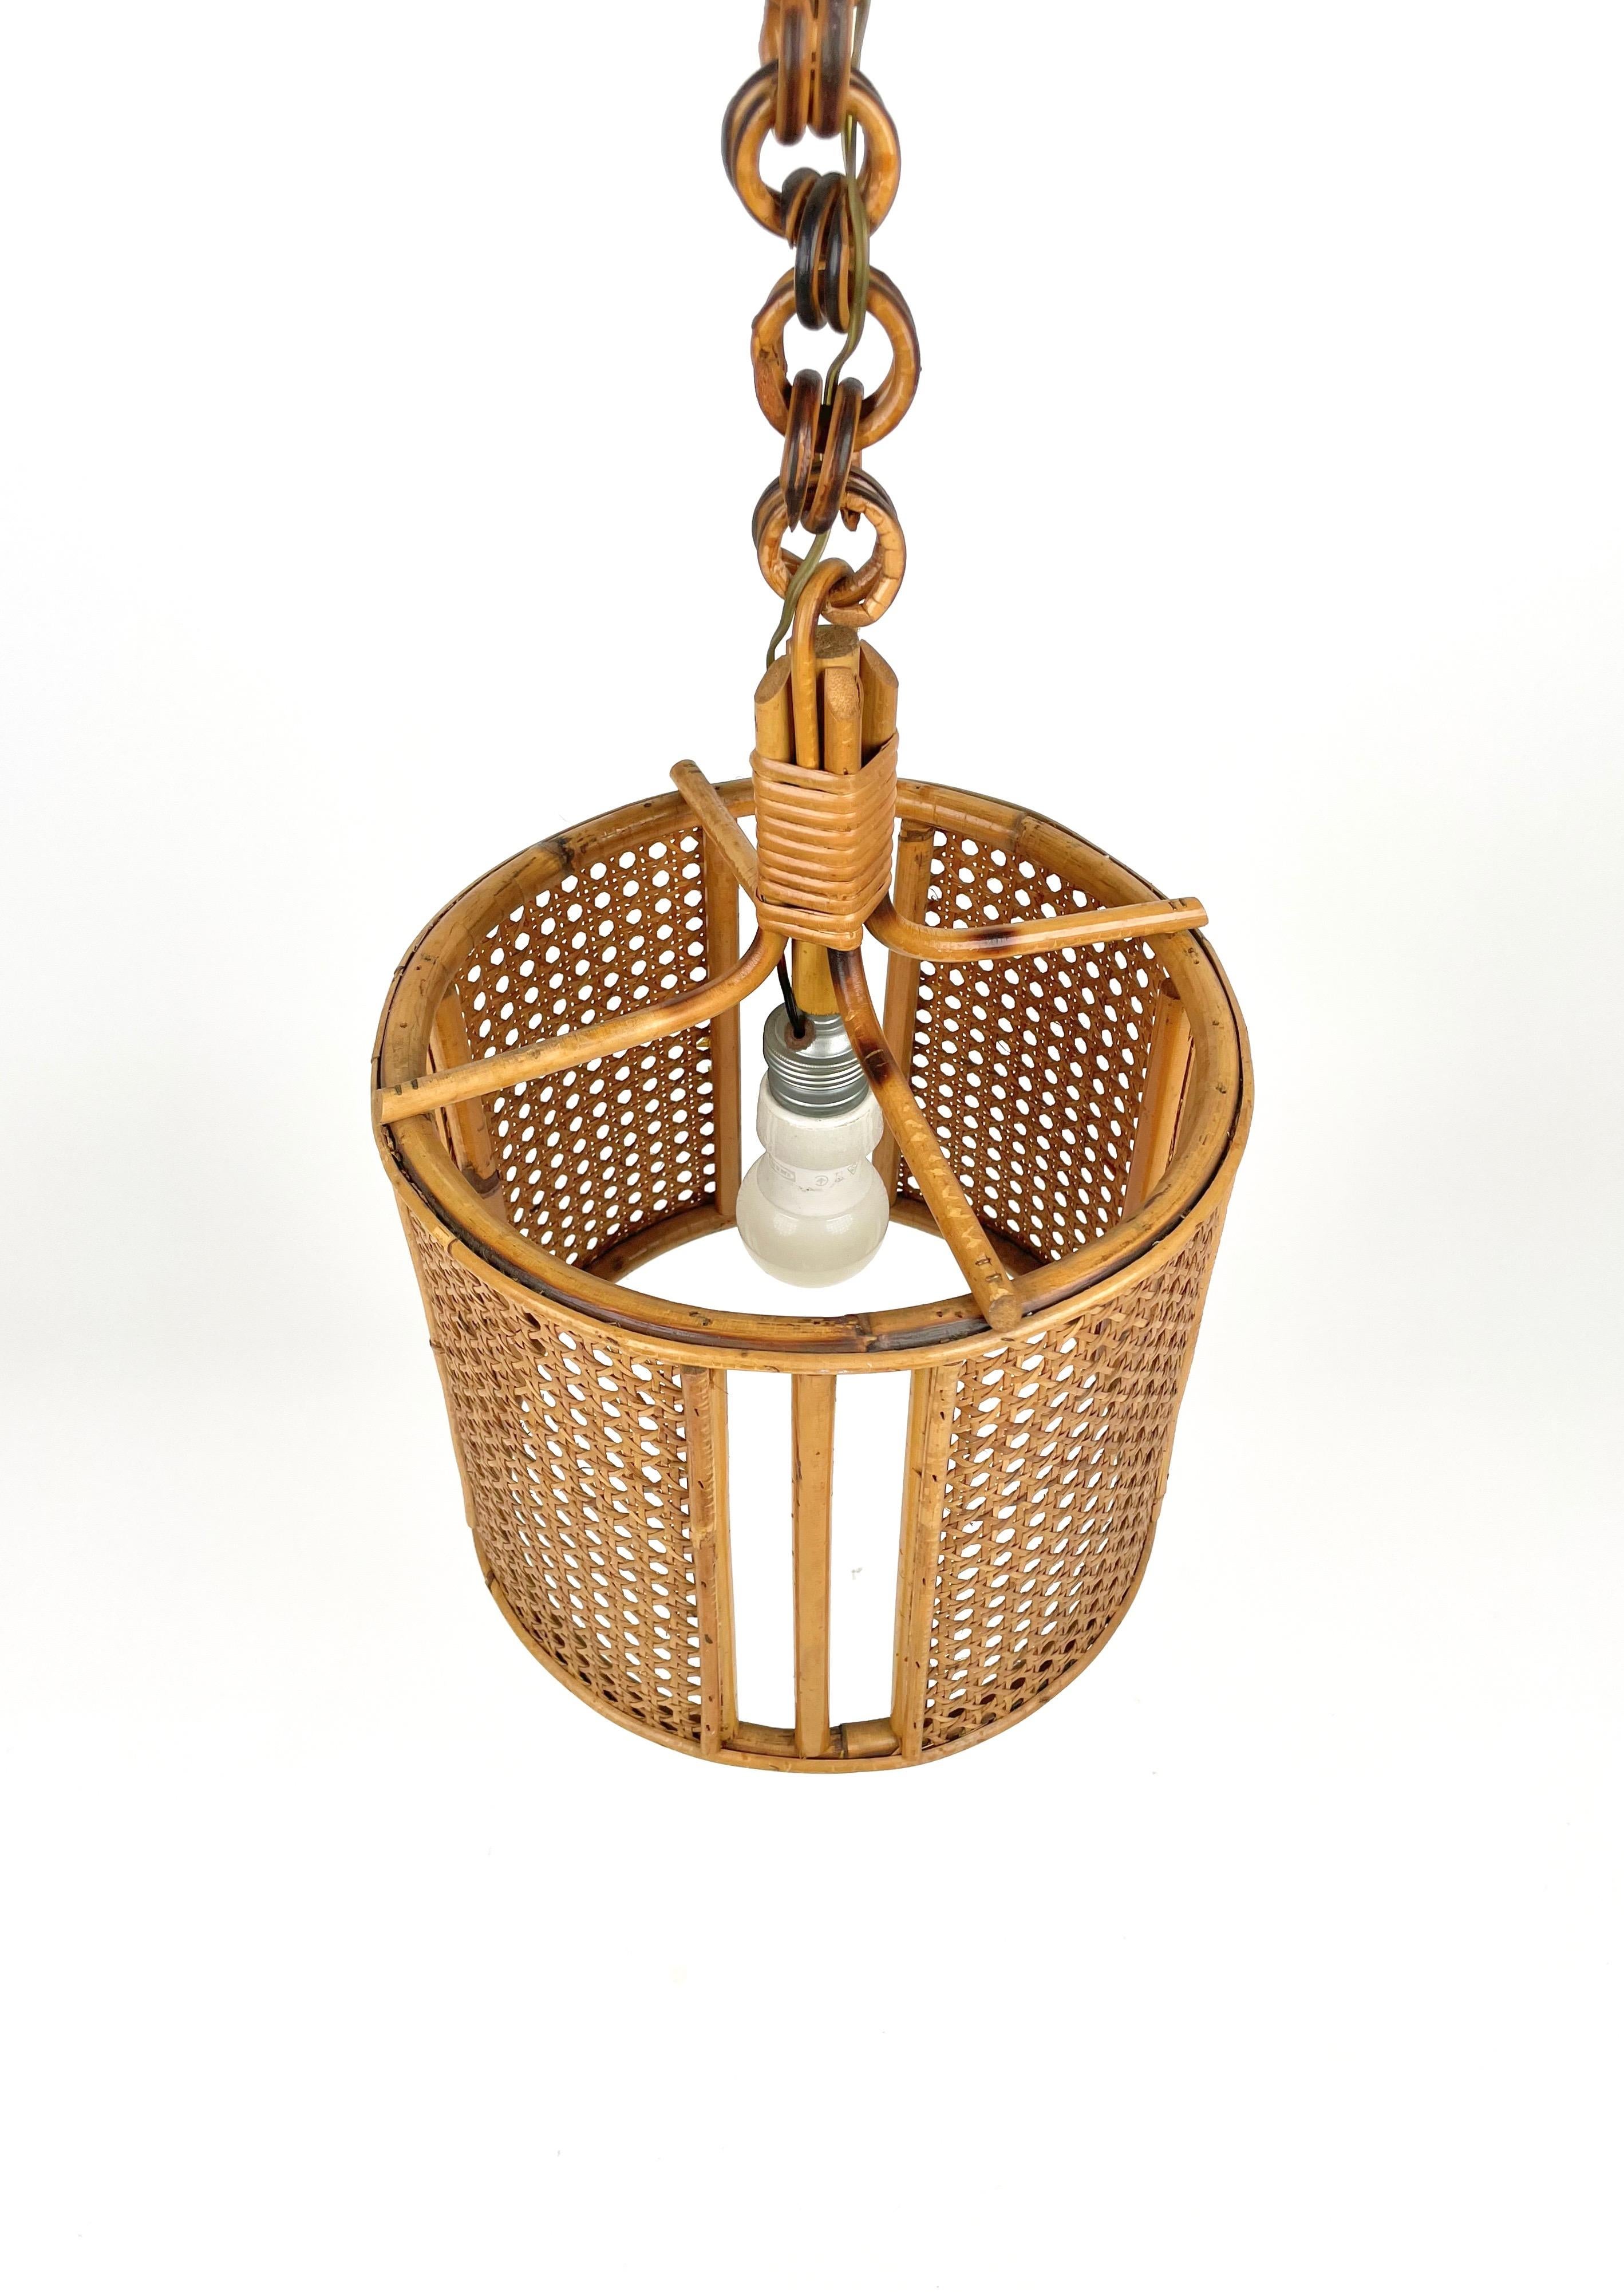 Midcentury French Riviera Rattan and Wicker Pendent, Italy 1960s For Sale 3